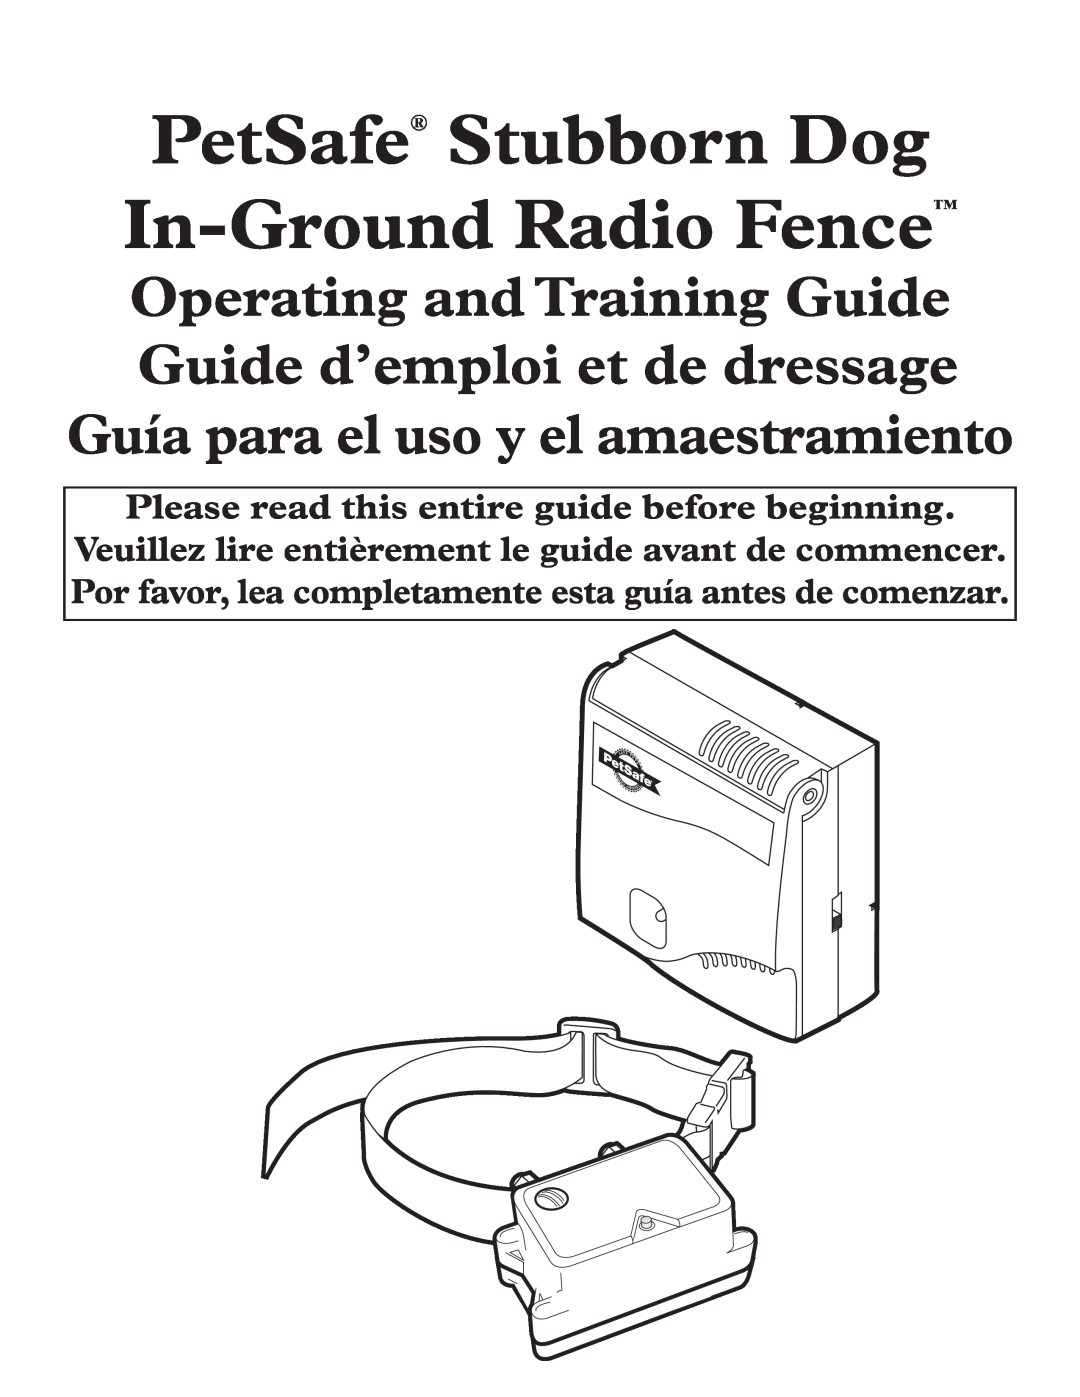 Petsafe RFA-200 manual PetSafe Stubborn Dog In-Ground Radio Fence, Please read this entire guide before beginning 